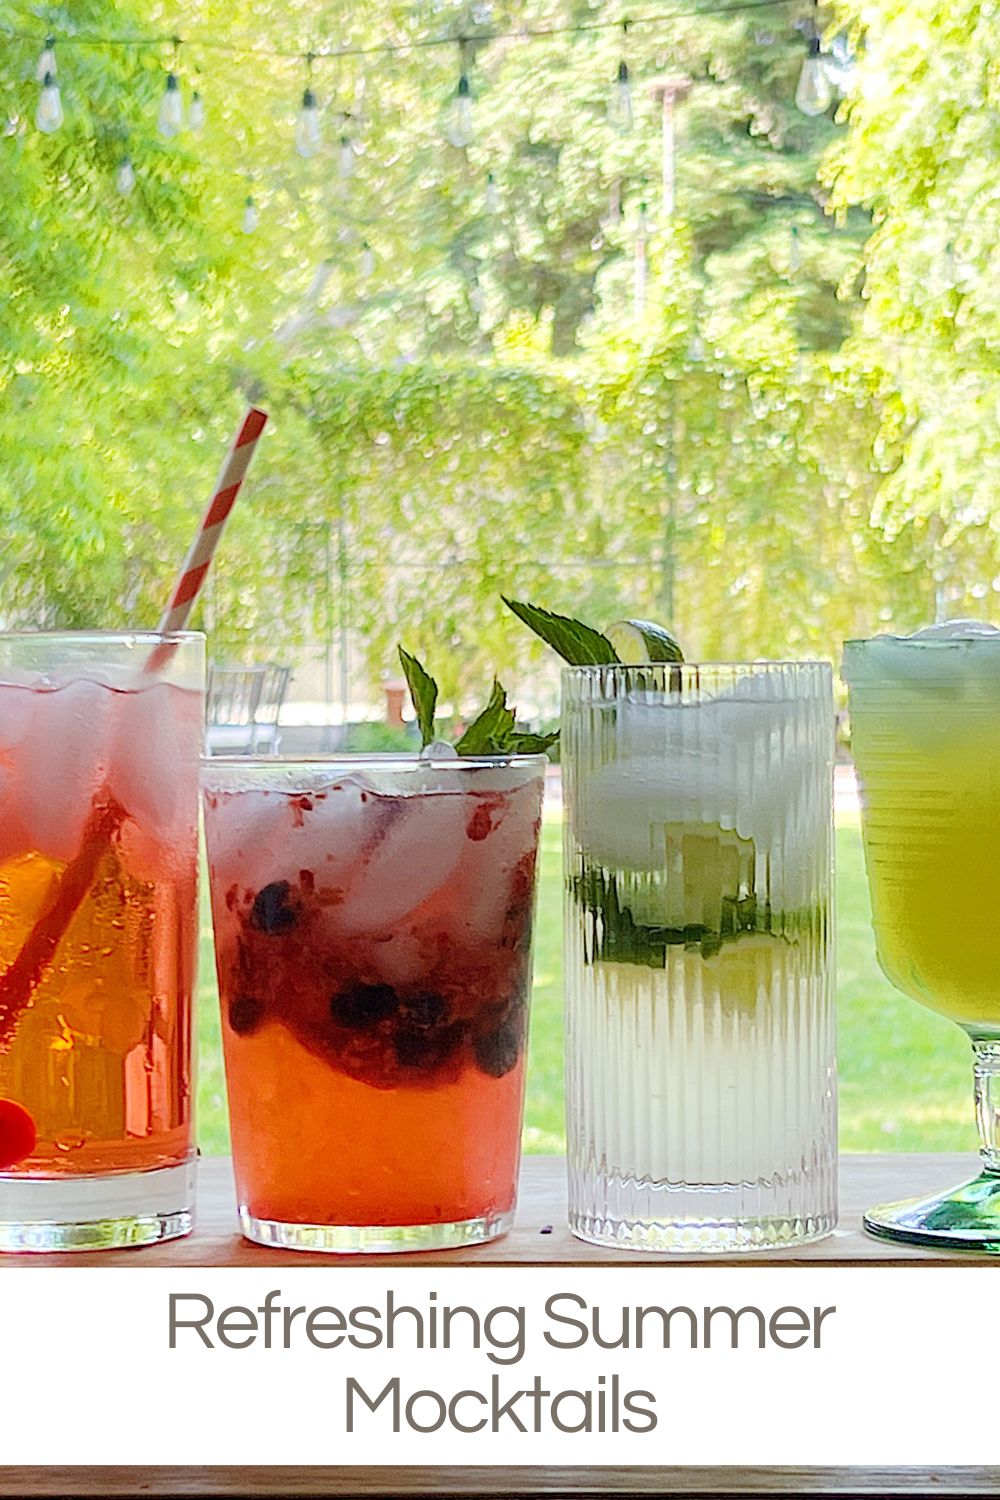 Sipping on a refreshing beverage during the summer is a delightful way to quench your thirst. Let's make some summer mocktails!